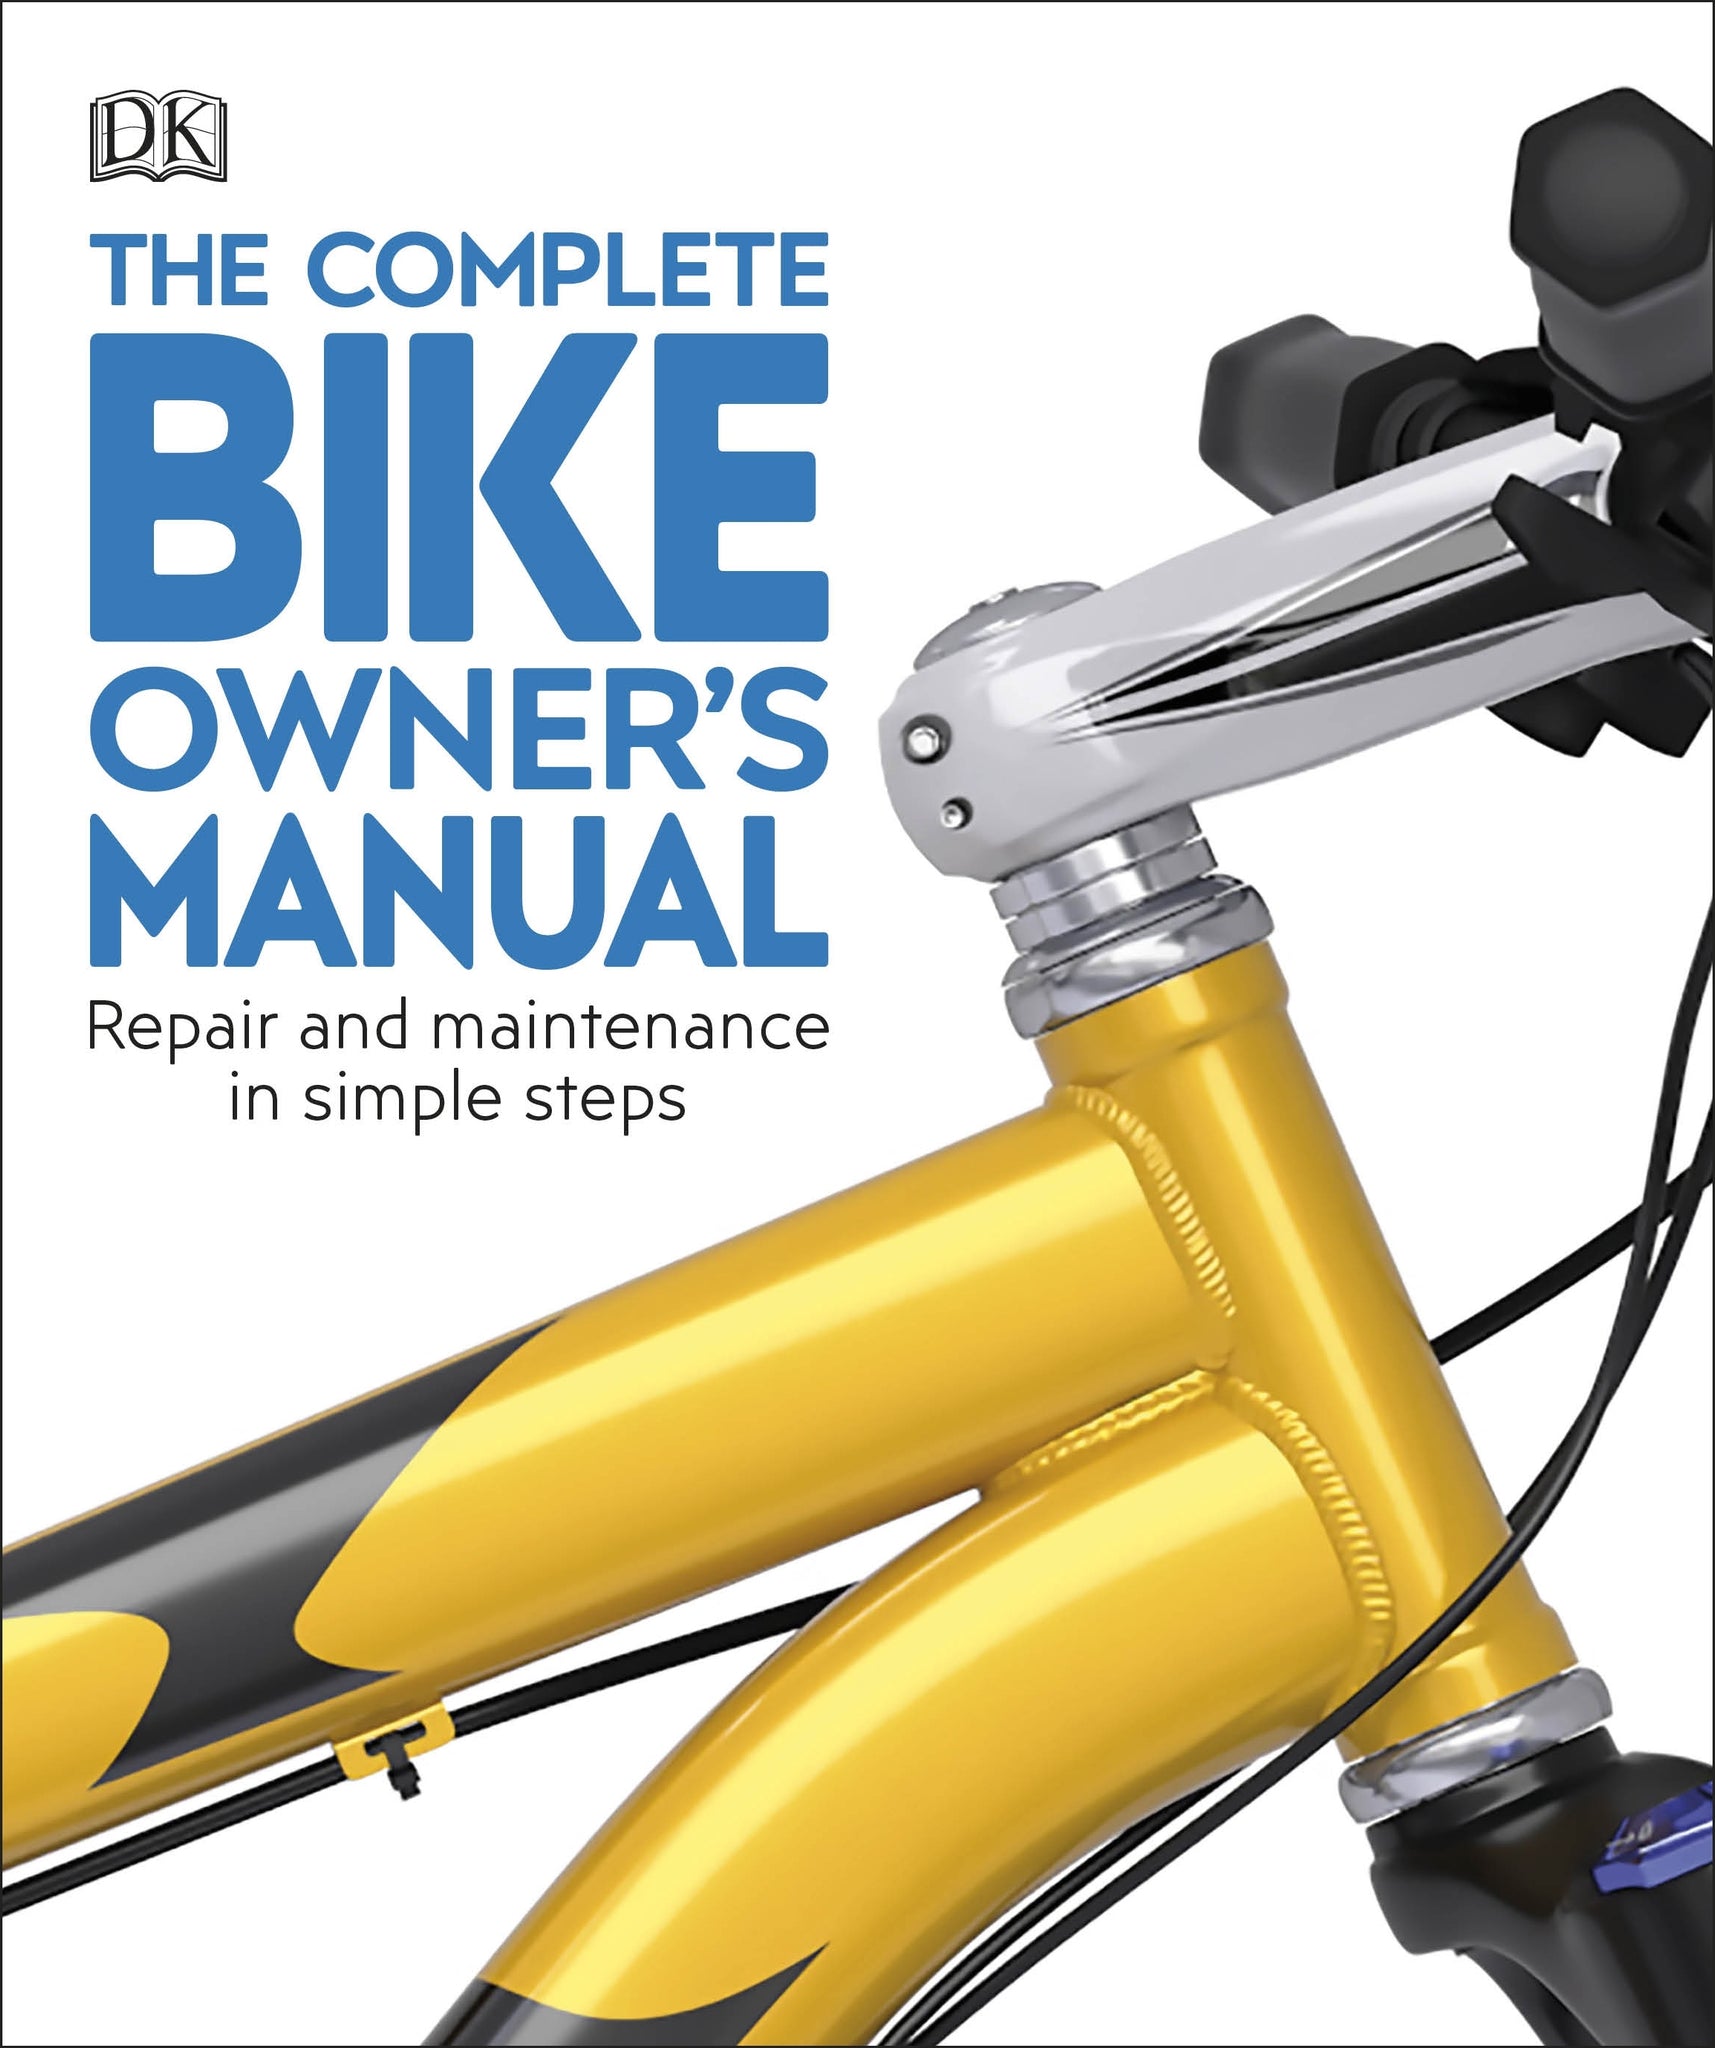 The Complete Bike Owner's Manual: Repair and Maintenance in Simple Steps - Paperback